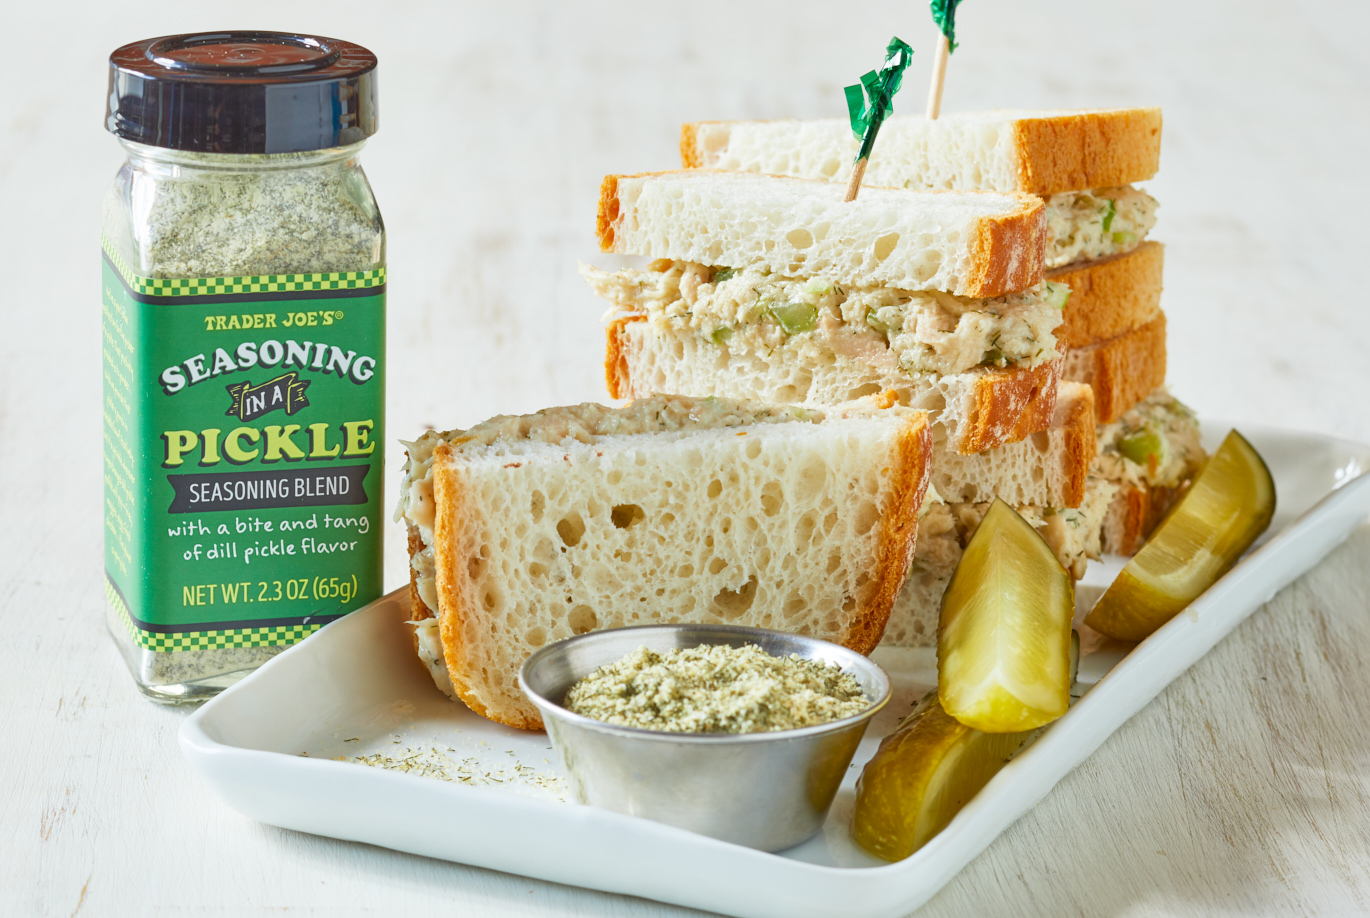 NEW] May 2022 Seasoning Product - Seasoning In A Pickle Seasoning Blend  (with a bite and tang of dill pickle flavor) - $2.49 (YMMV, might not be  in all stores yet) : r/traderjoes